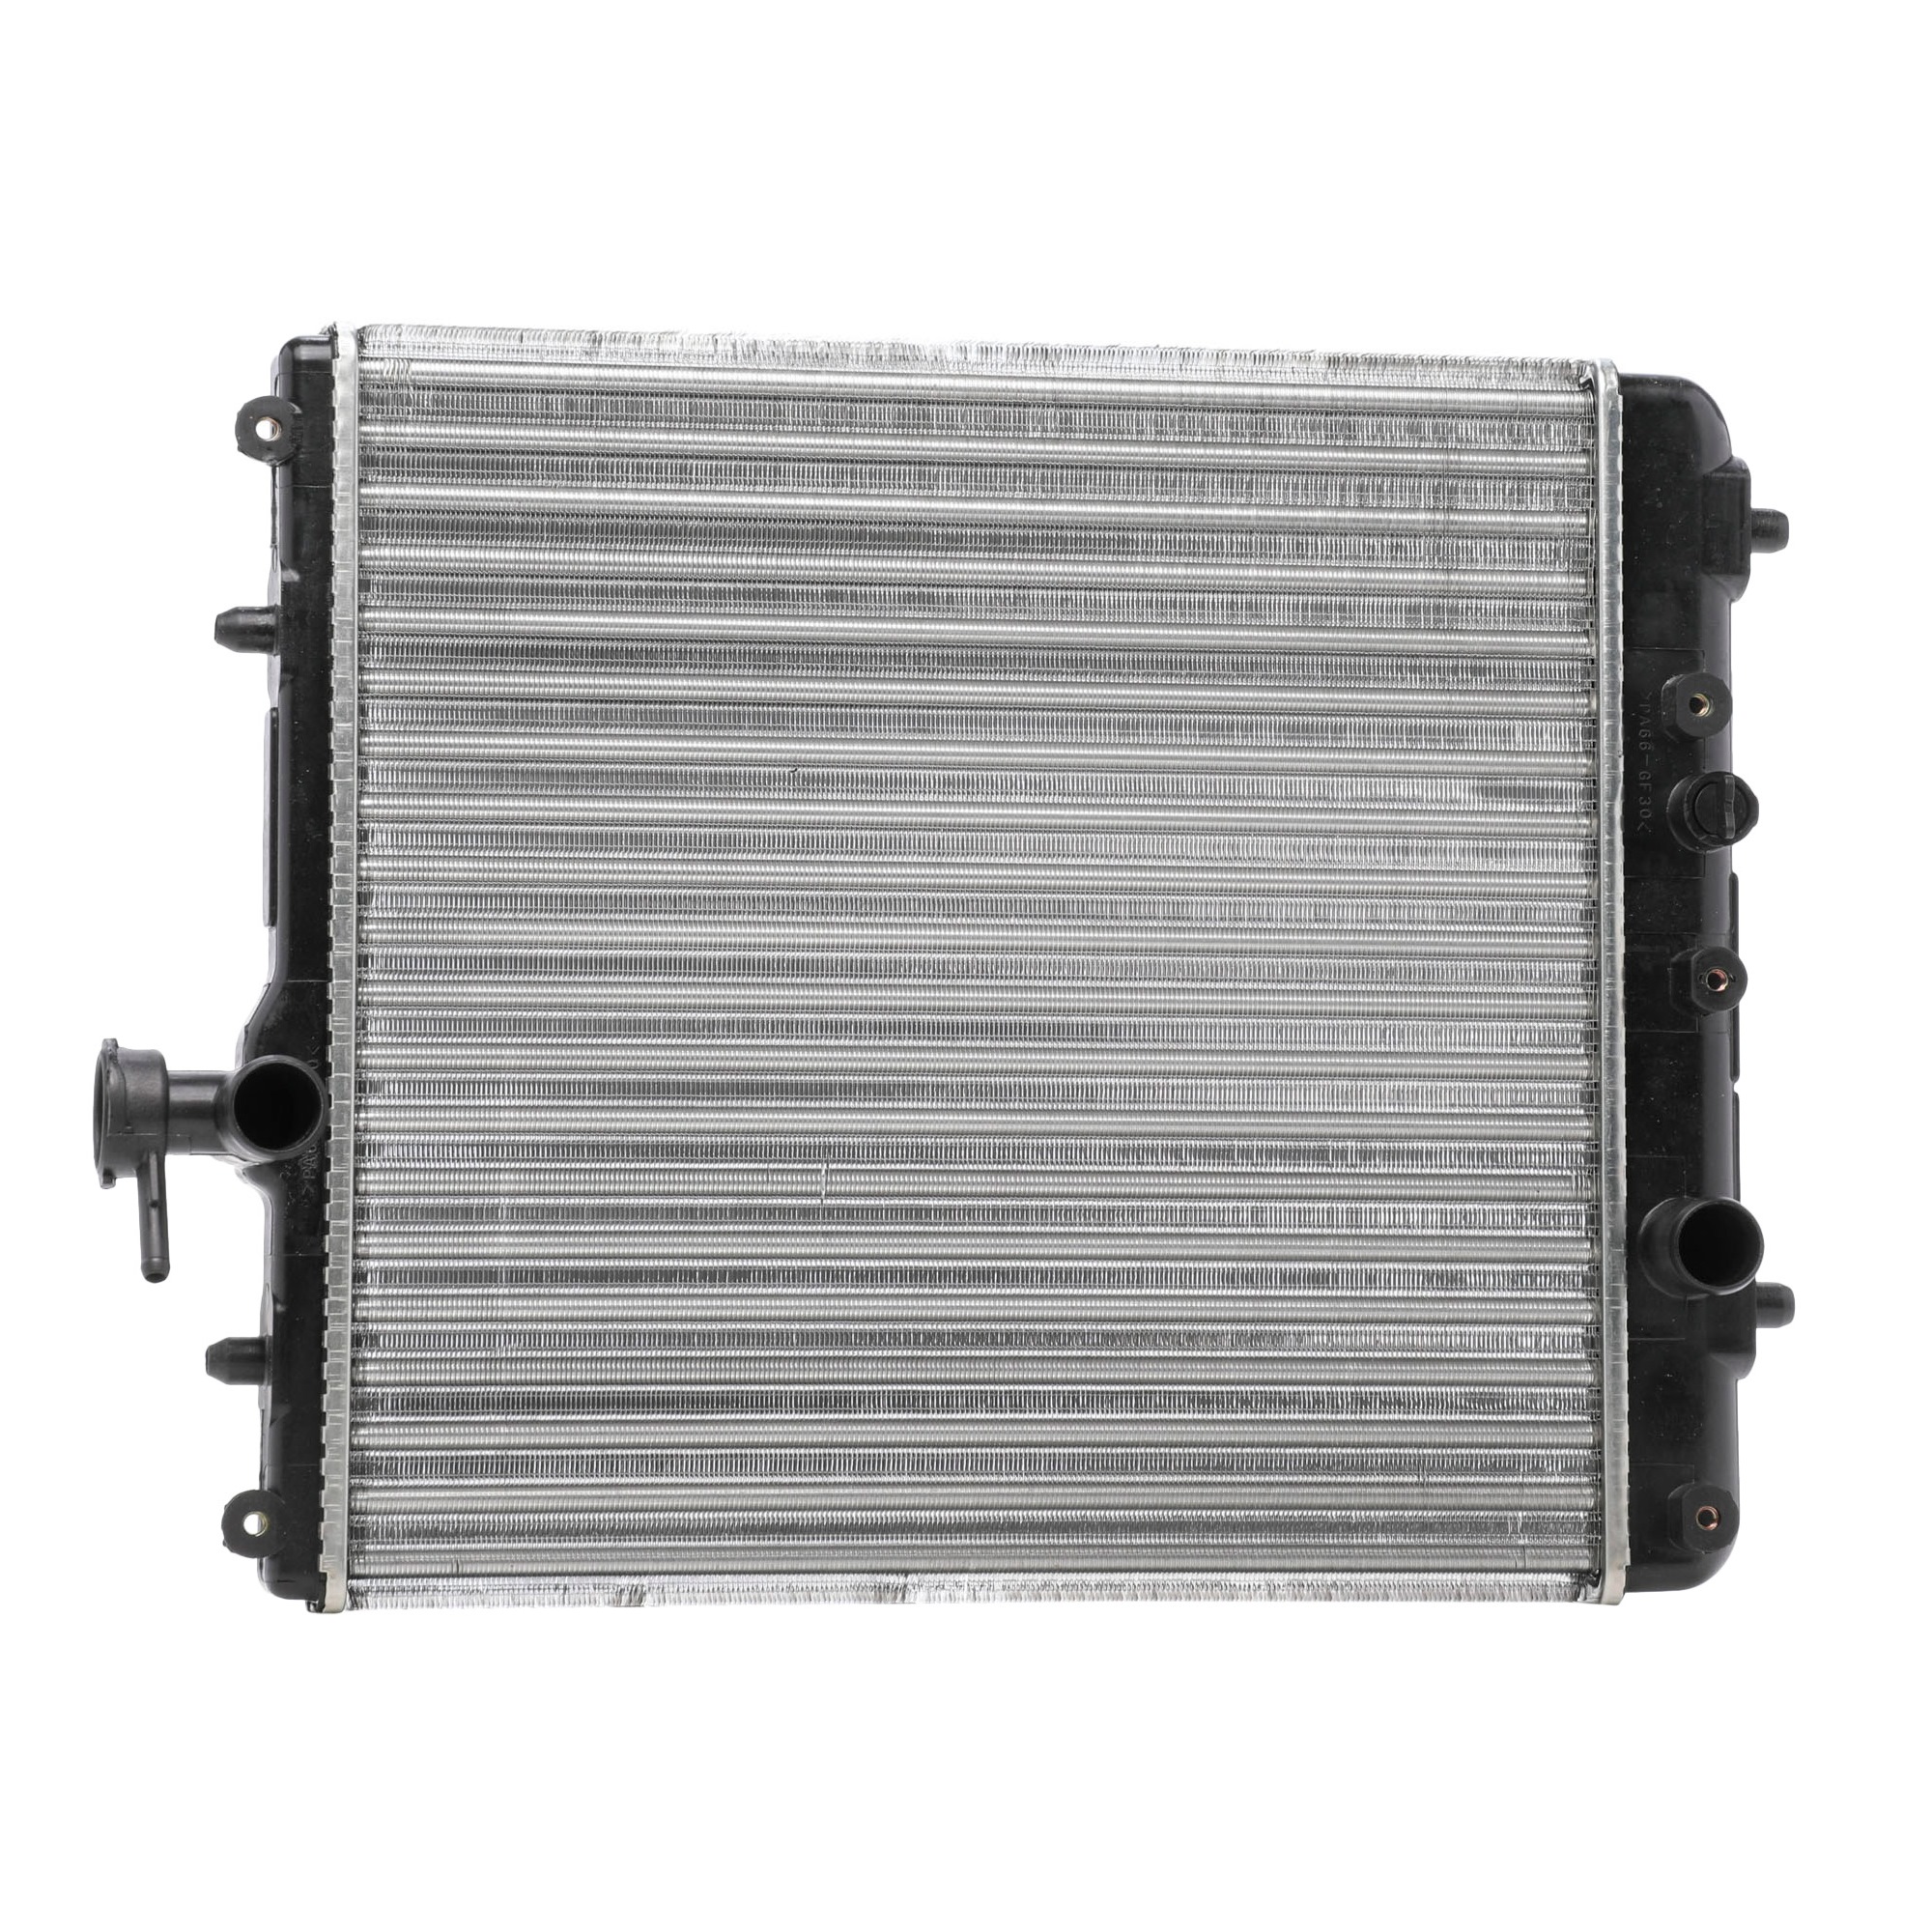 NRF 53824A Engine radiator Aluminium, 380 x 378 x 34 mm, Mechanically jointed cooling fins